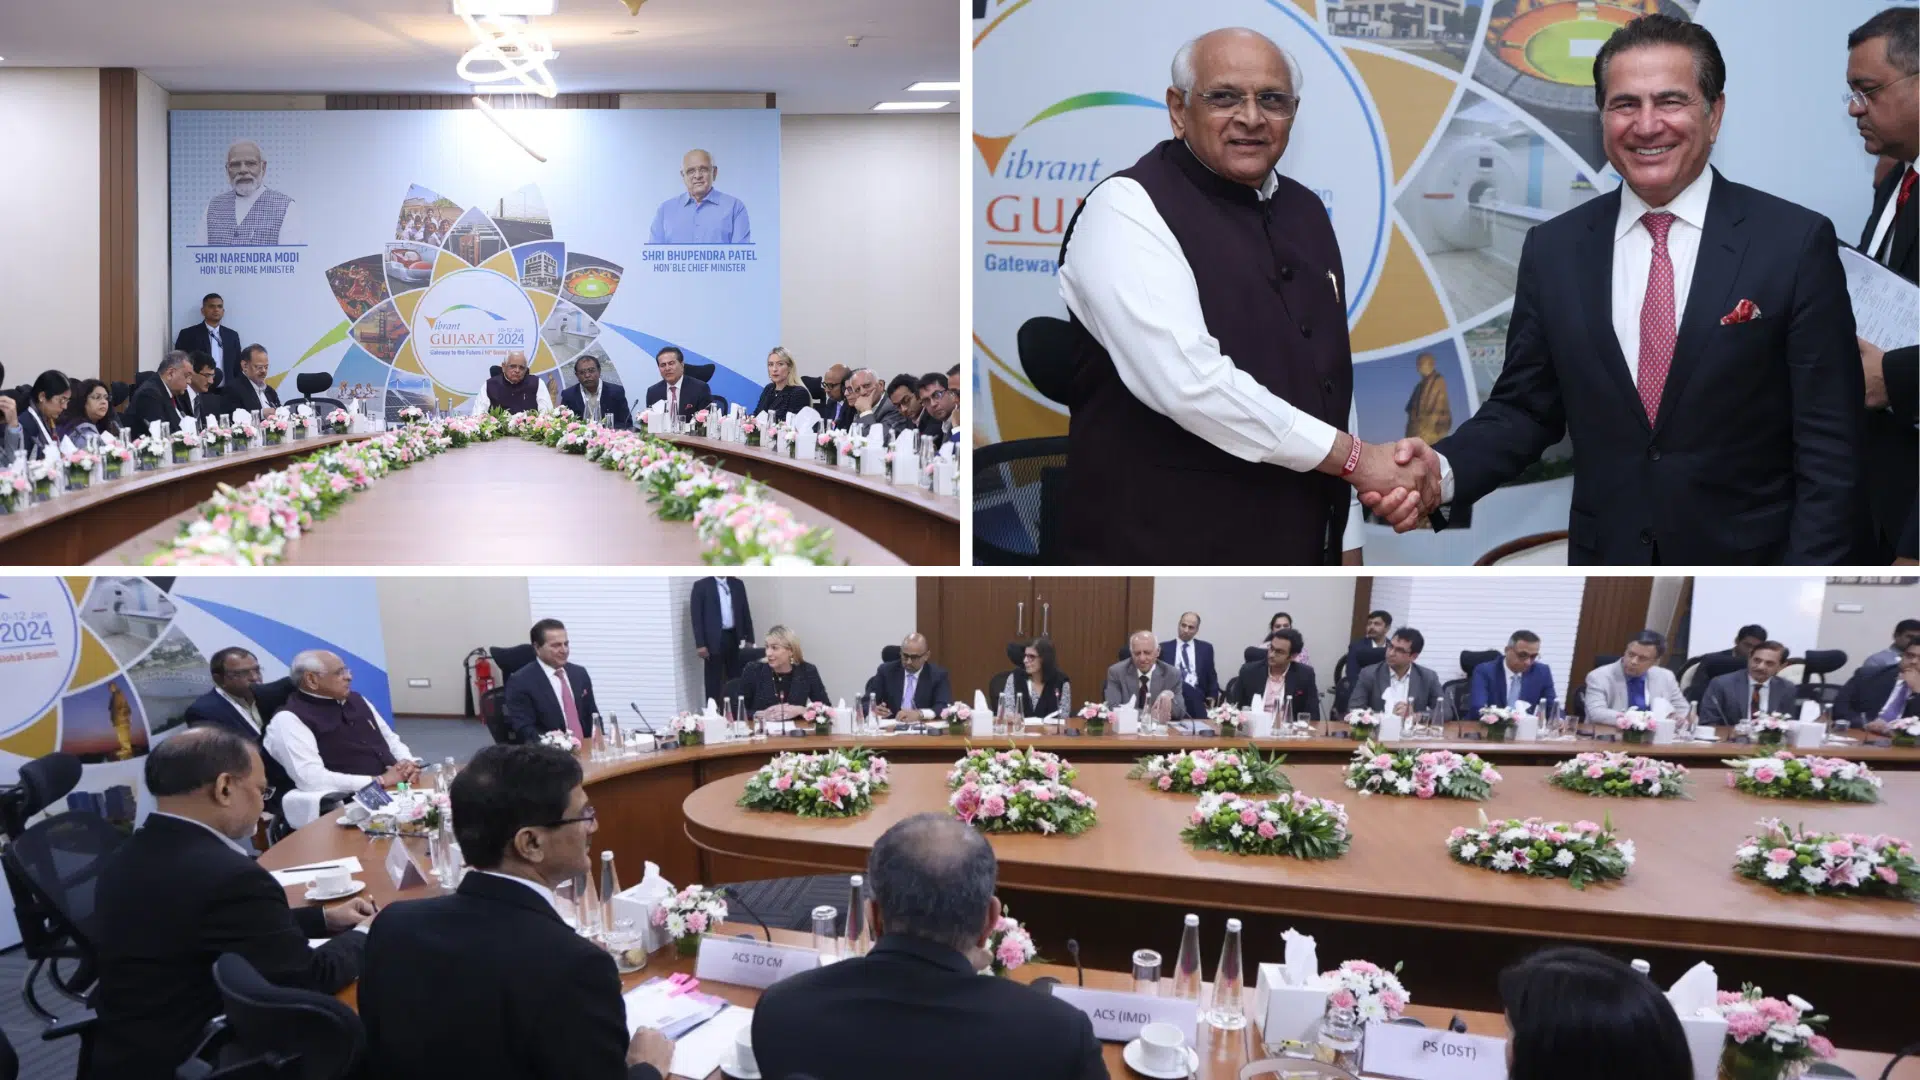 USISPF delegation led by Dr. Mukesh Aghi conducts a roundtable meeting with CM of Gujarat Shri Bhupendra Patel